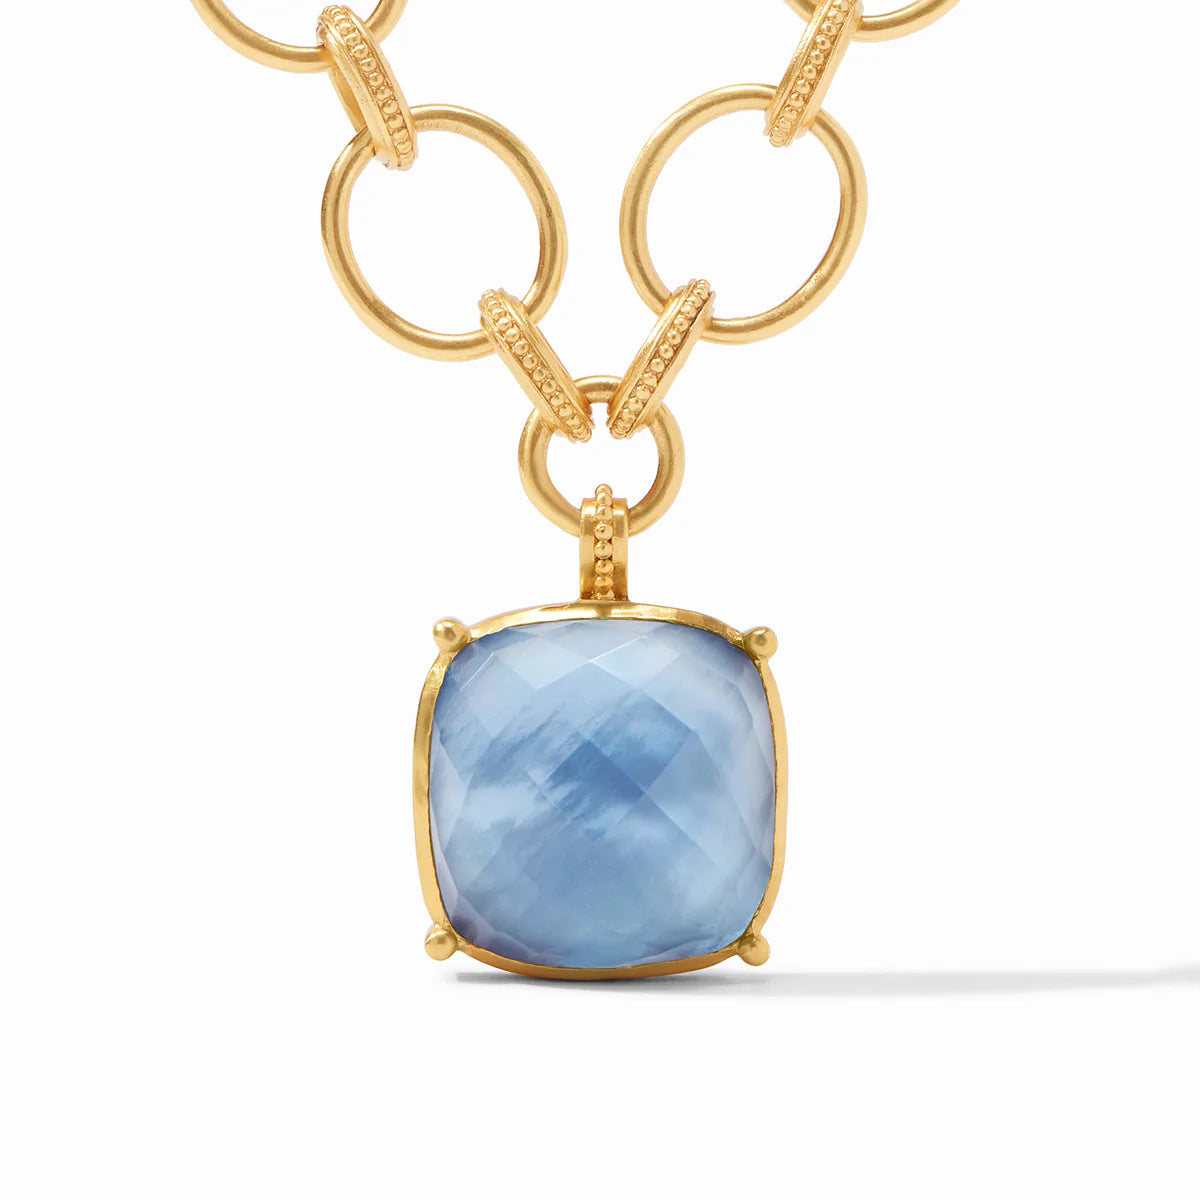 Antonia Statement Necklace Iridescent Chalcedony Blue by Julie Vos features square cut pendant in iridescent blue anchoring elegant chain measuring 19.5 inch length, 24K gold plate. Shop at The Painted Cottage an Annapolis boutique. 